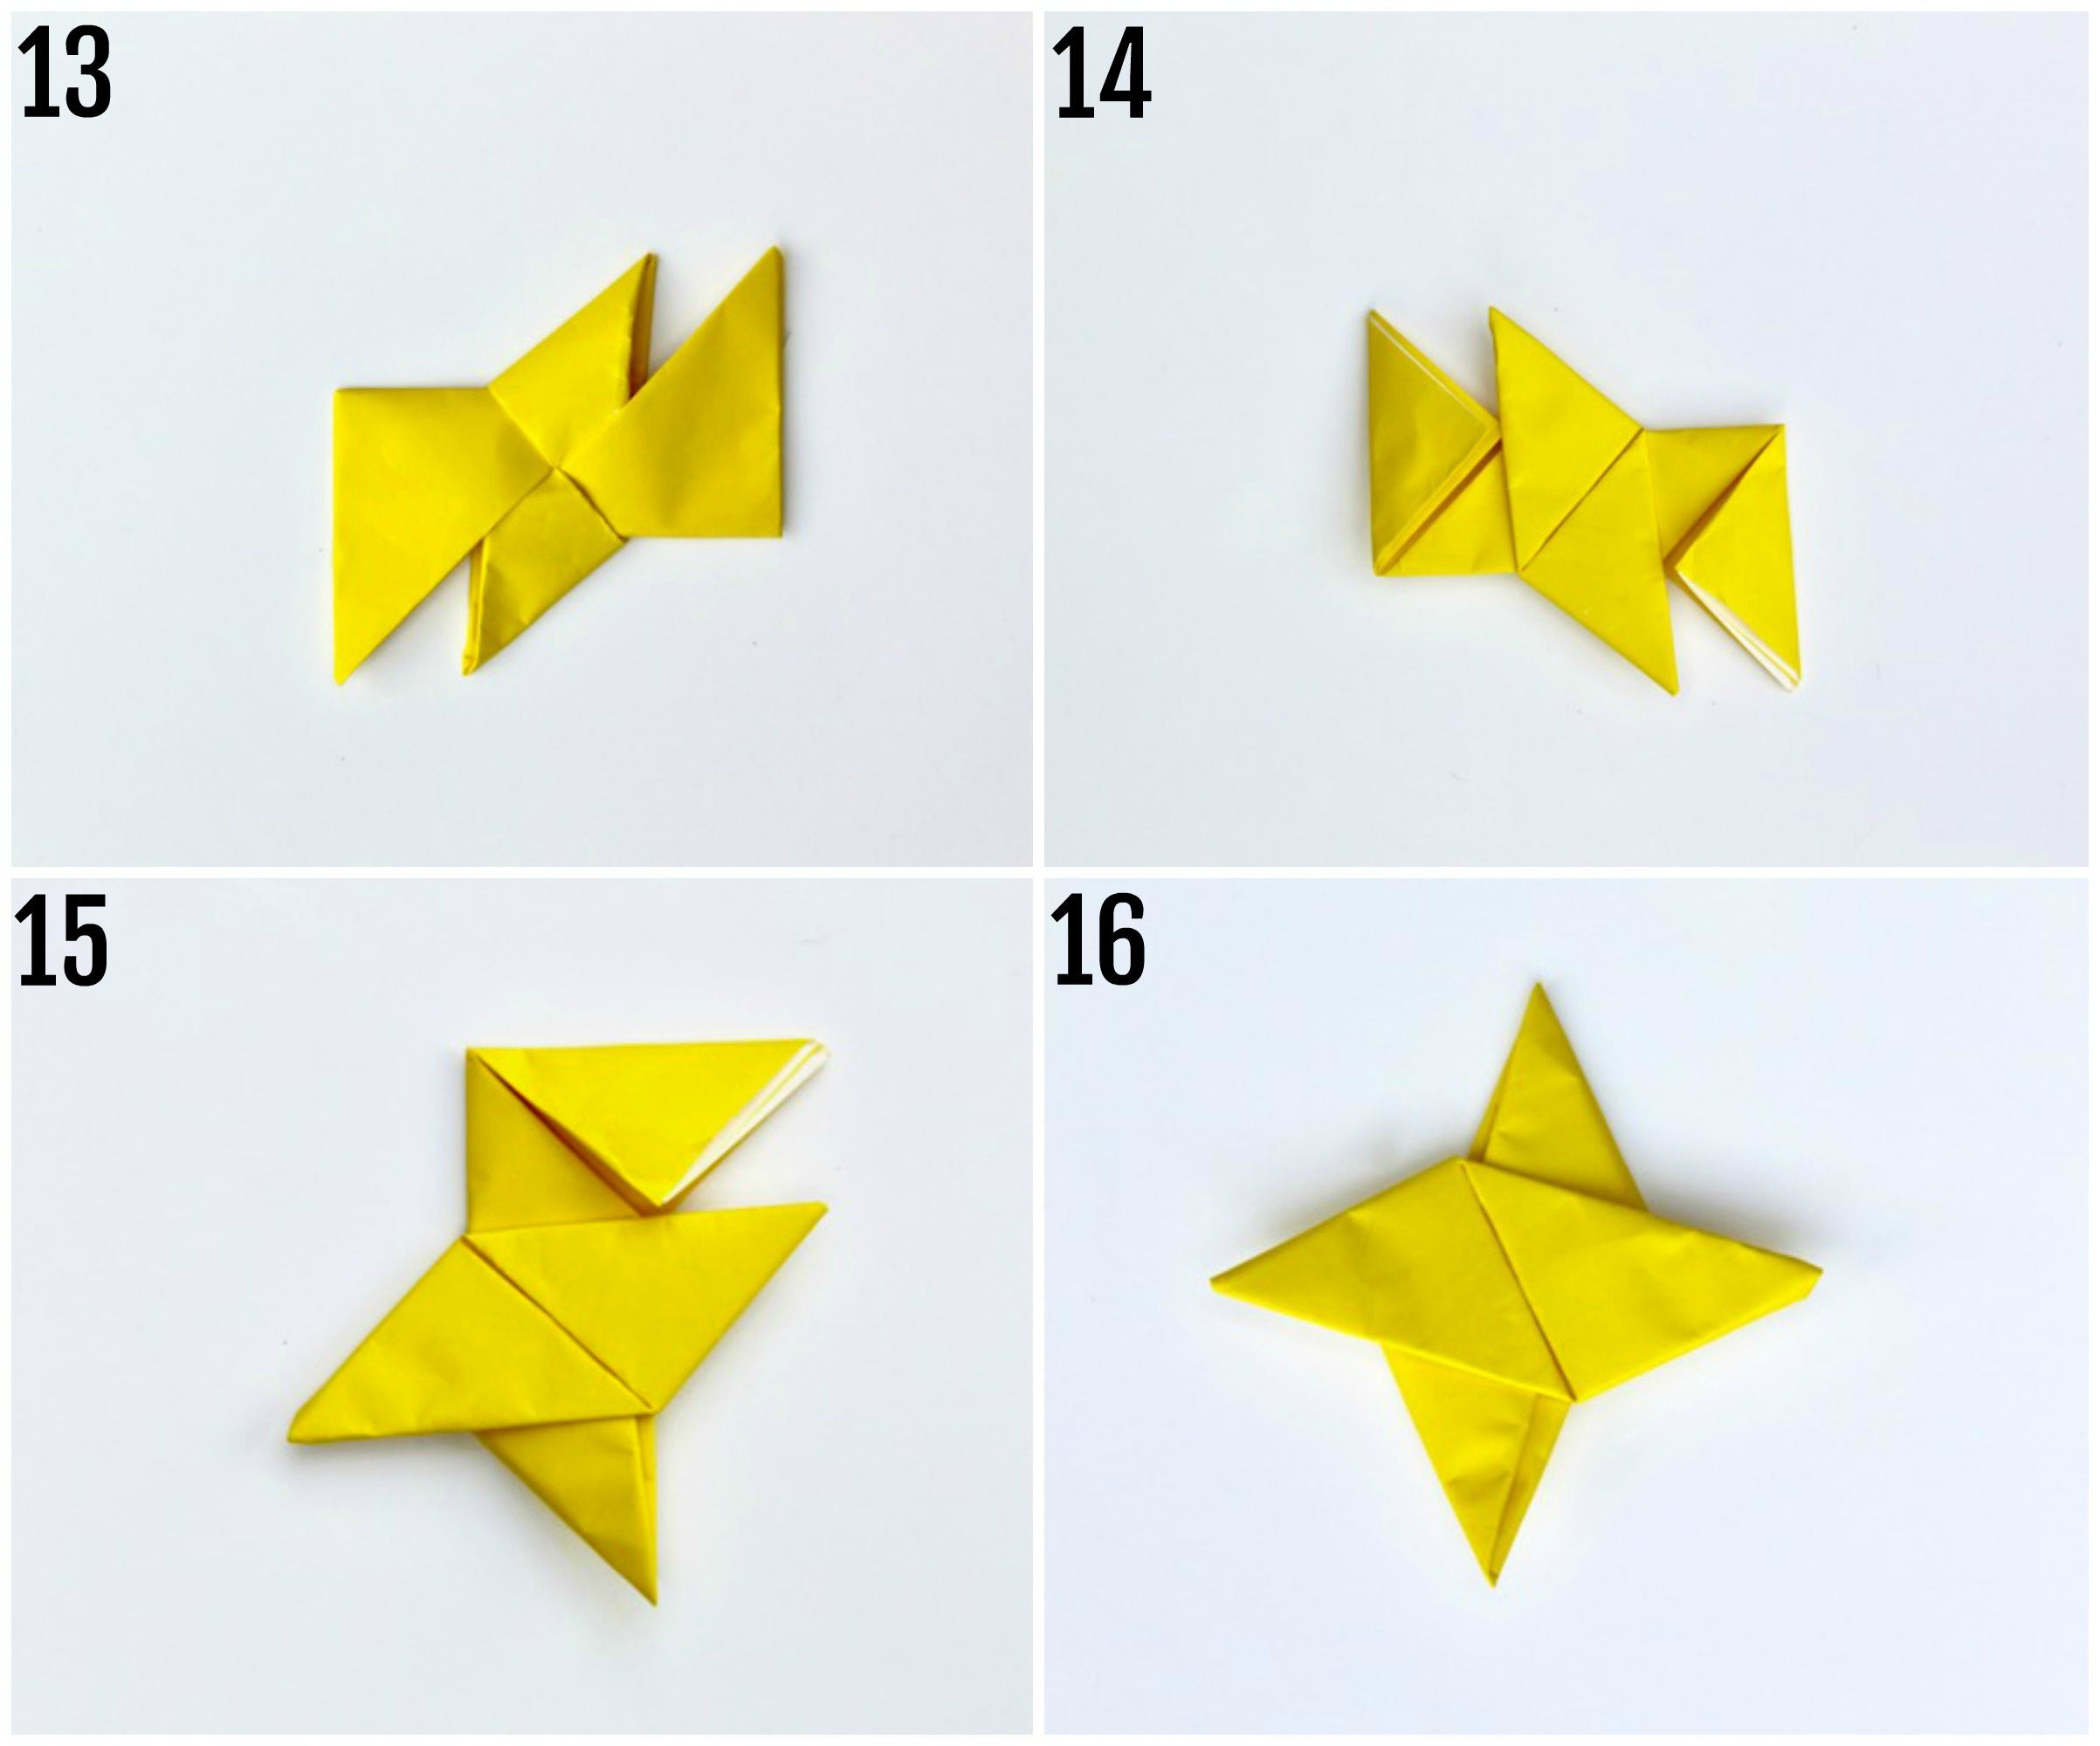 It's so much fun to make folded ninja stars from origami paper, and it